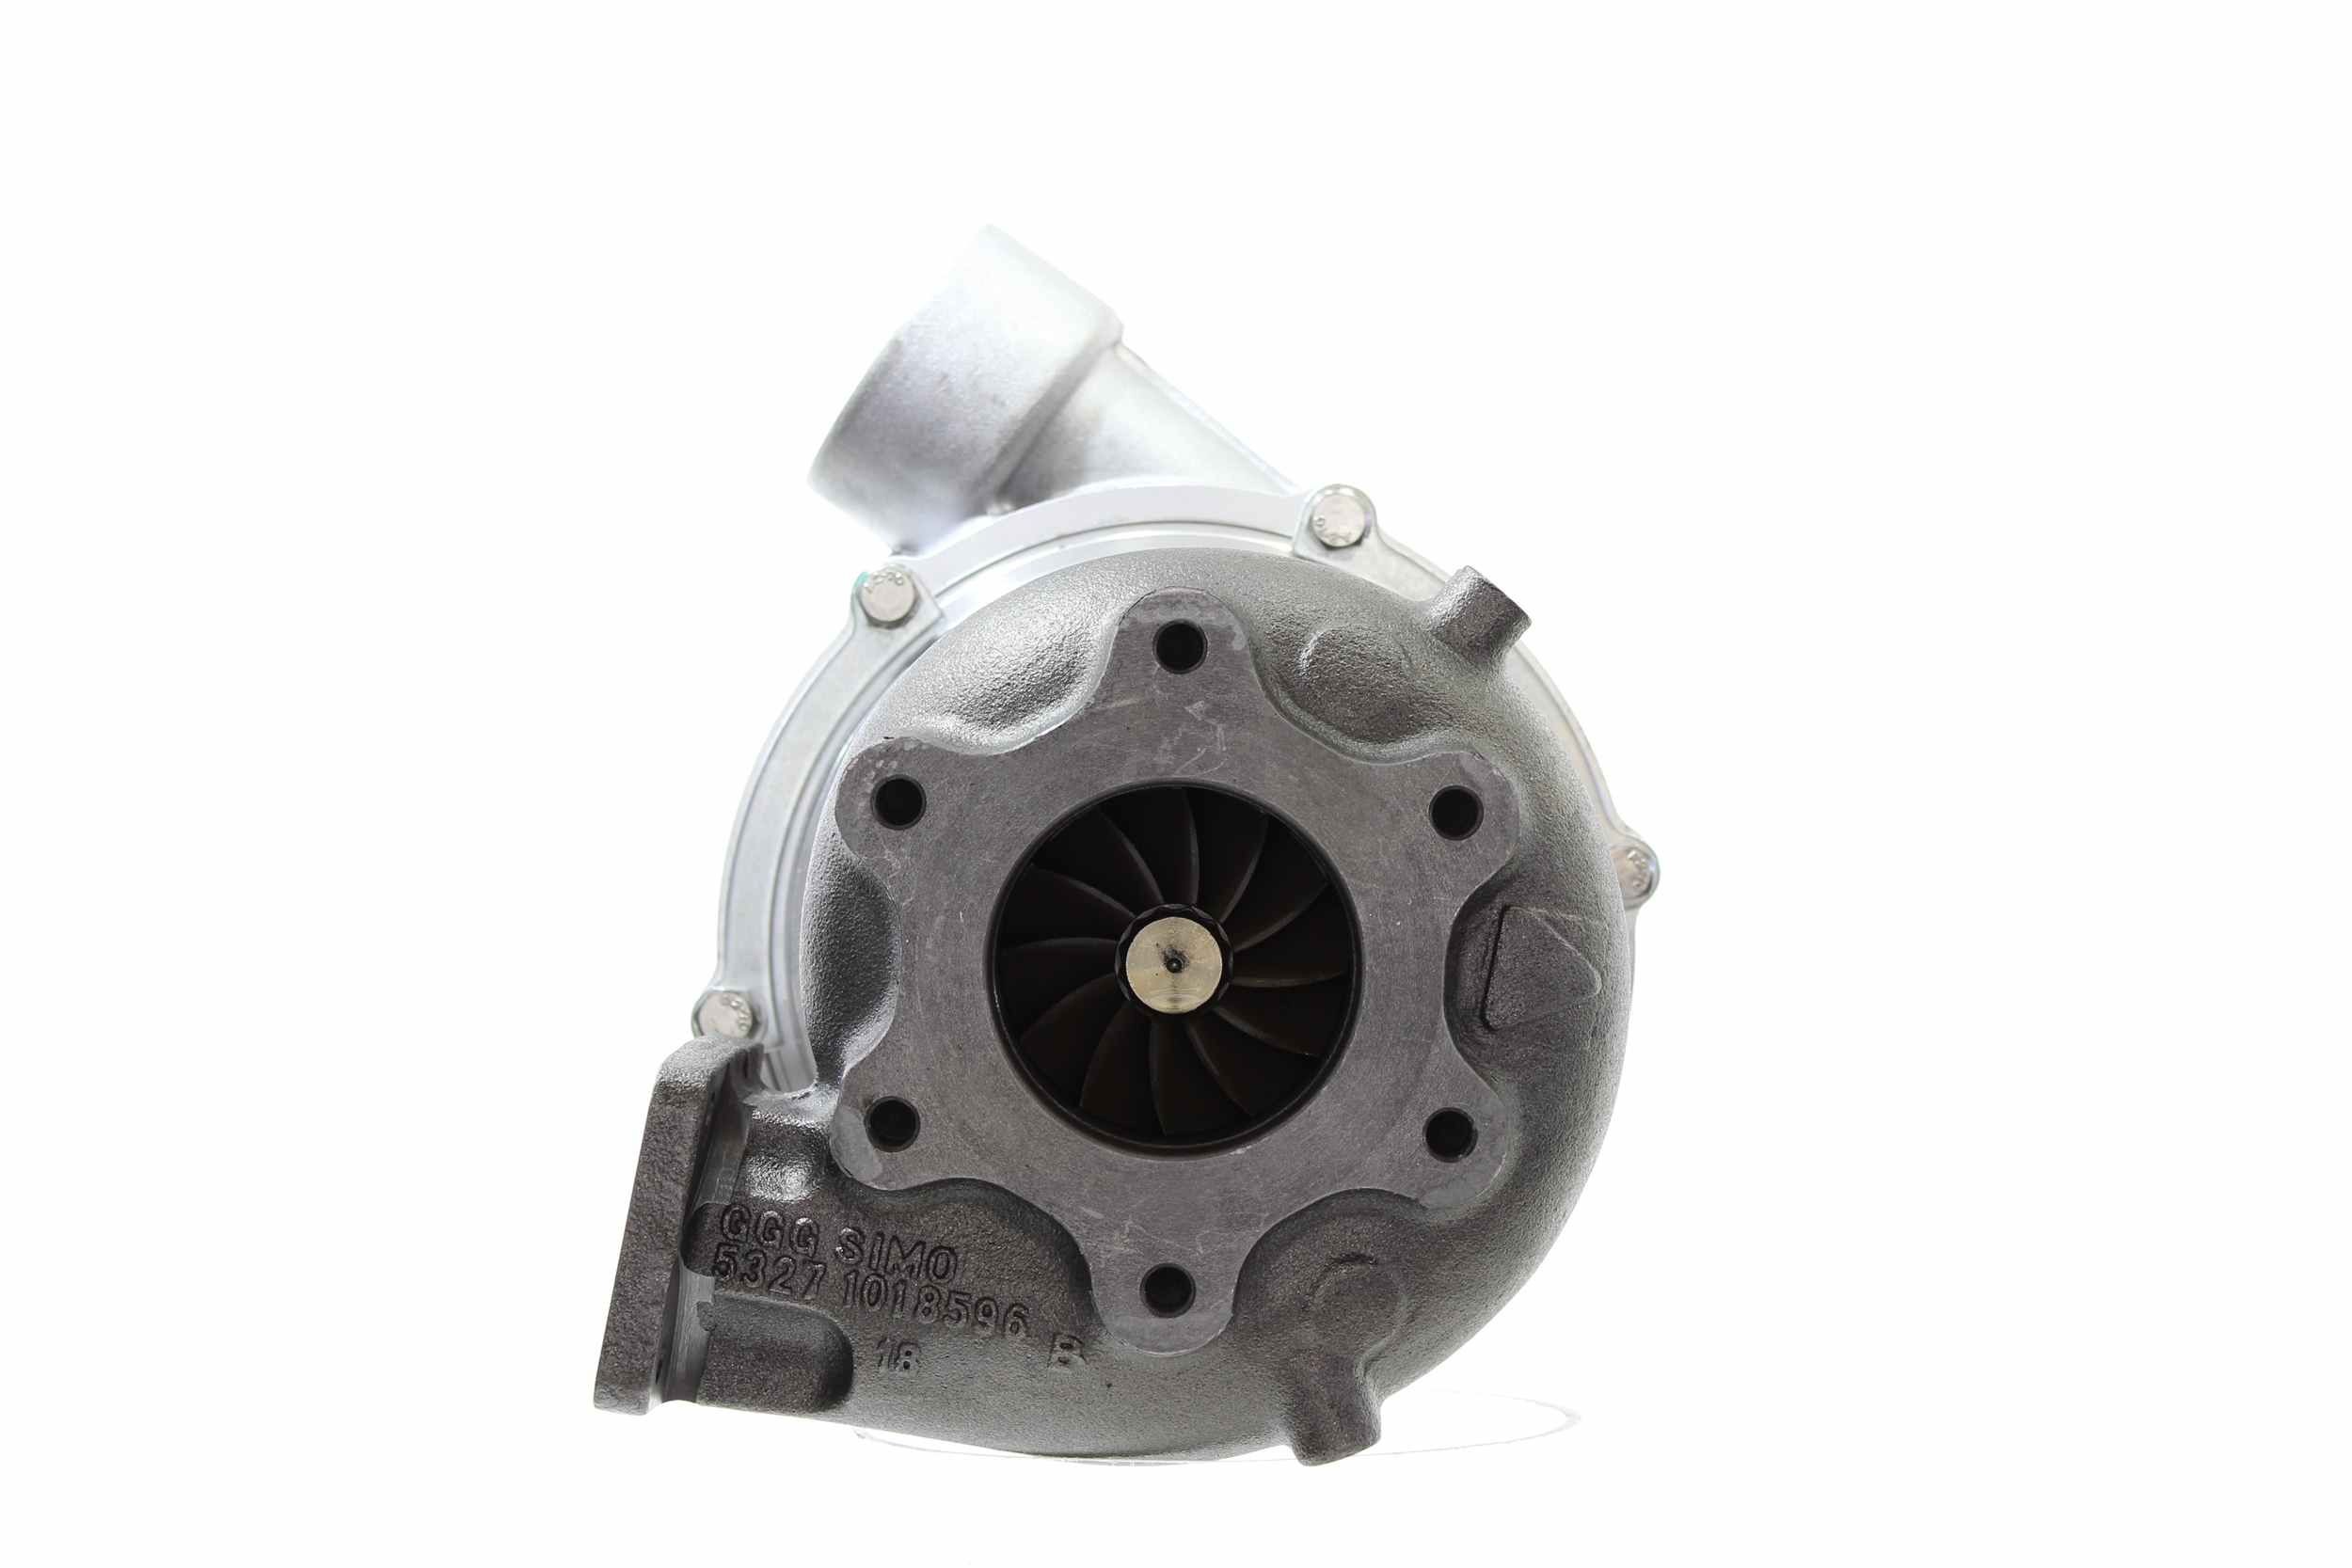 ALANKO 900521 Turbo Exhaust Turbocharger, Incl. Gasket Set, with attachment material